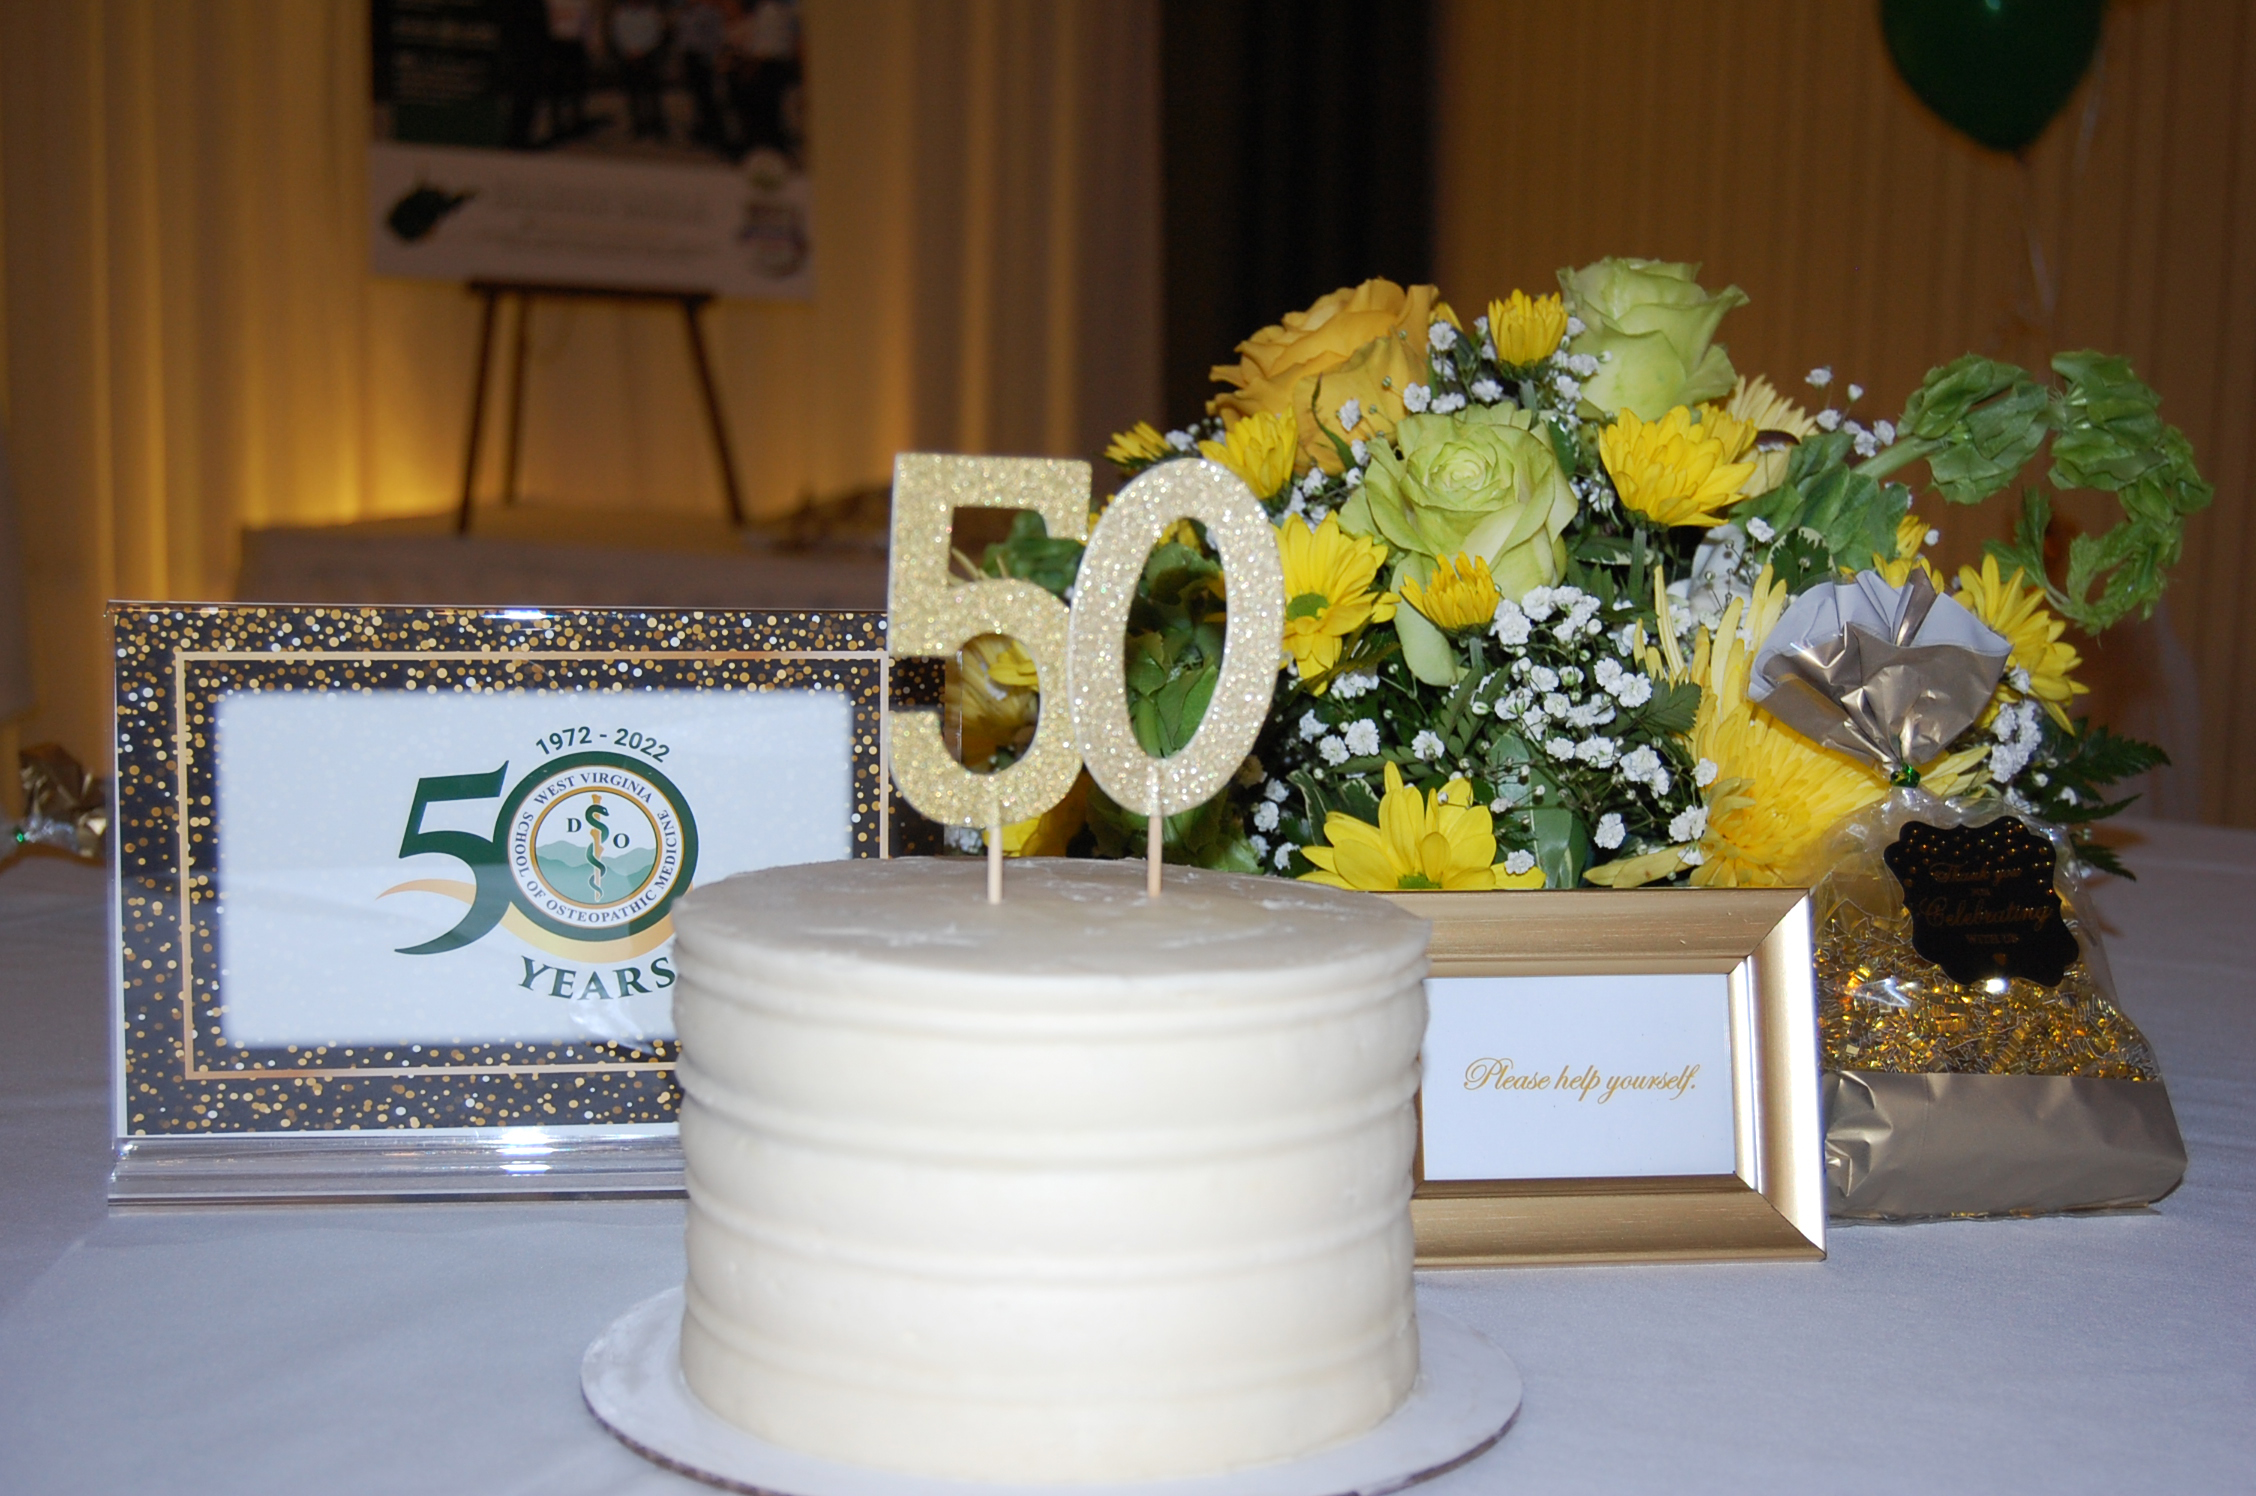 Round white cake with WVSOM 50 years decorations and flowers on table